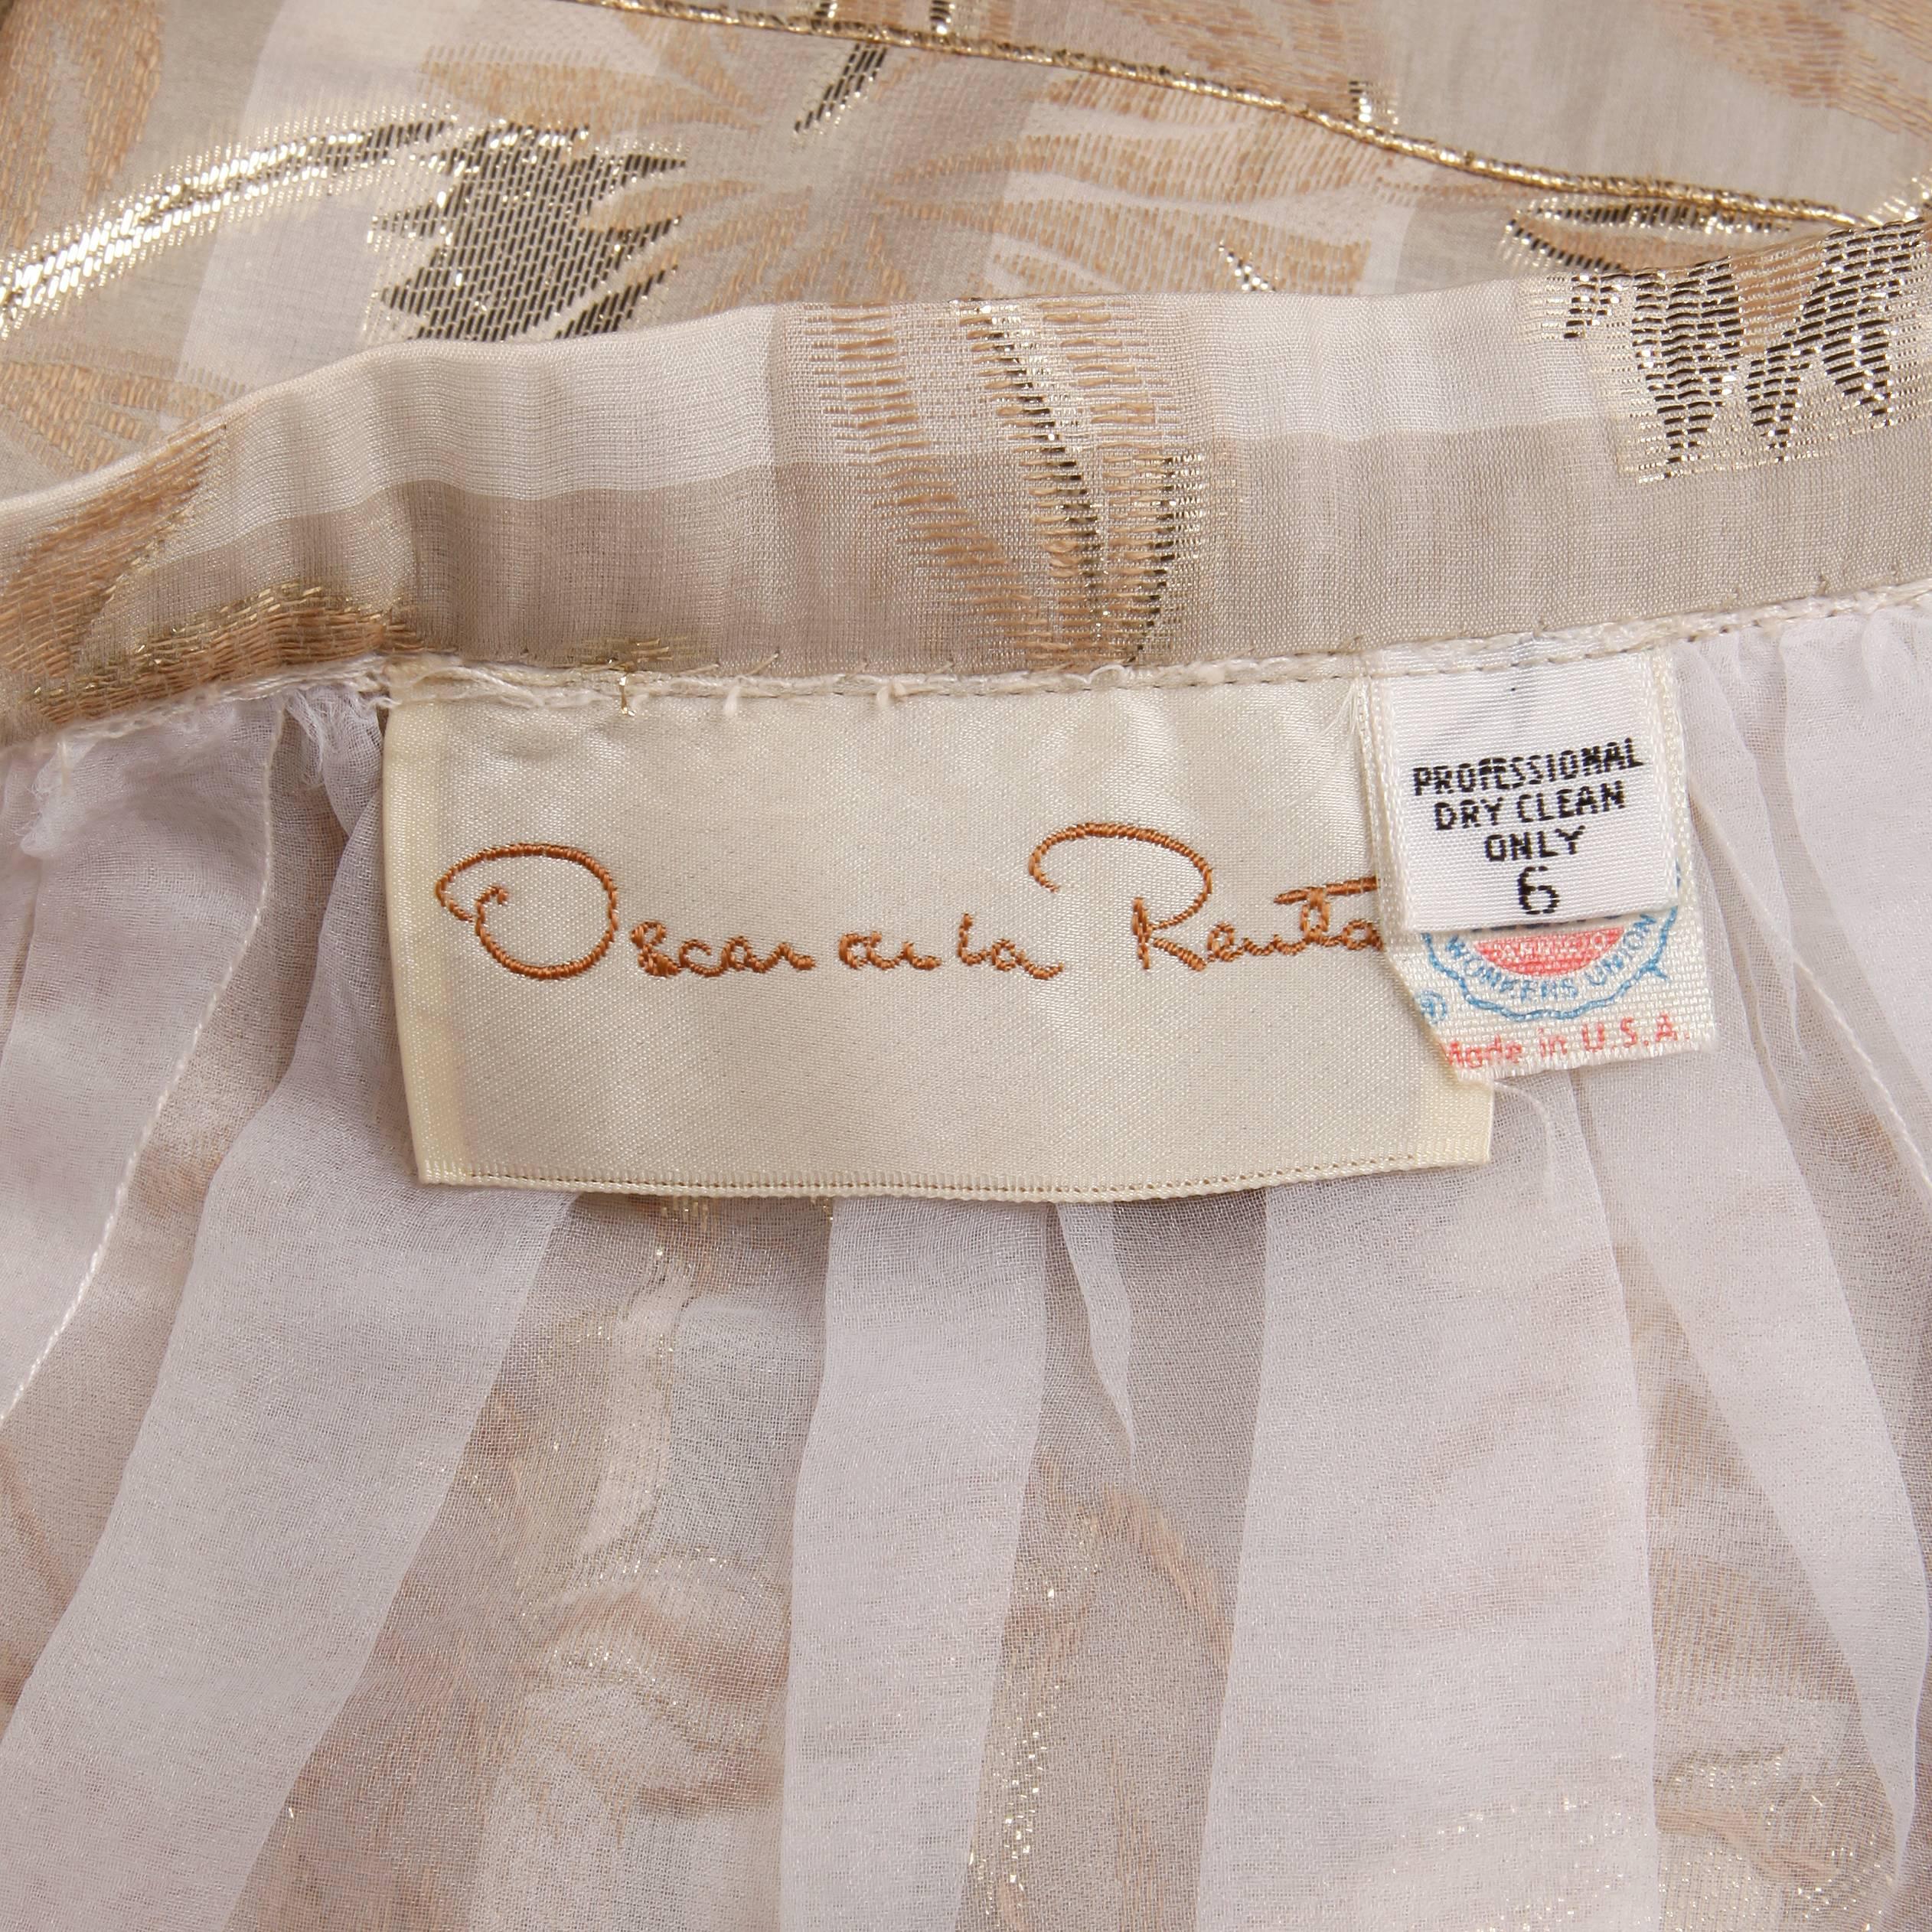 Stunning vintage silk maxi skirt by Oscar de la Renta with an overall white, nude, and metallic gold design. Fully lined with side hook, snap and button closure. The marked size is 6, but the skirt fits like a modern size XS-S. The waist measures